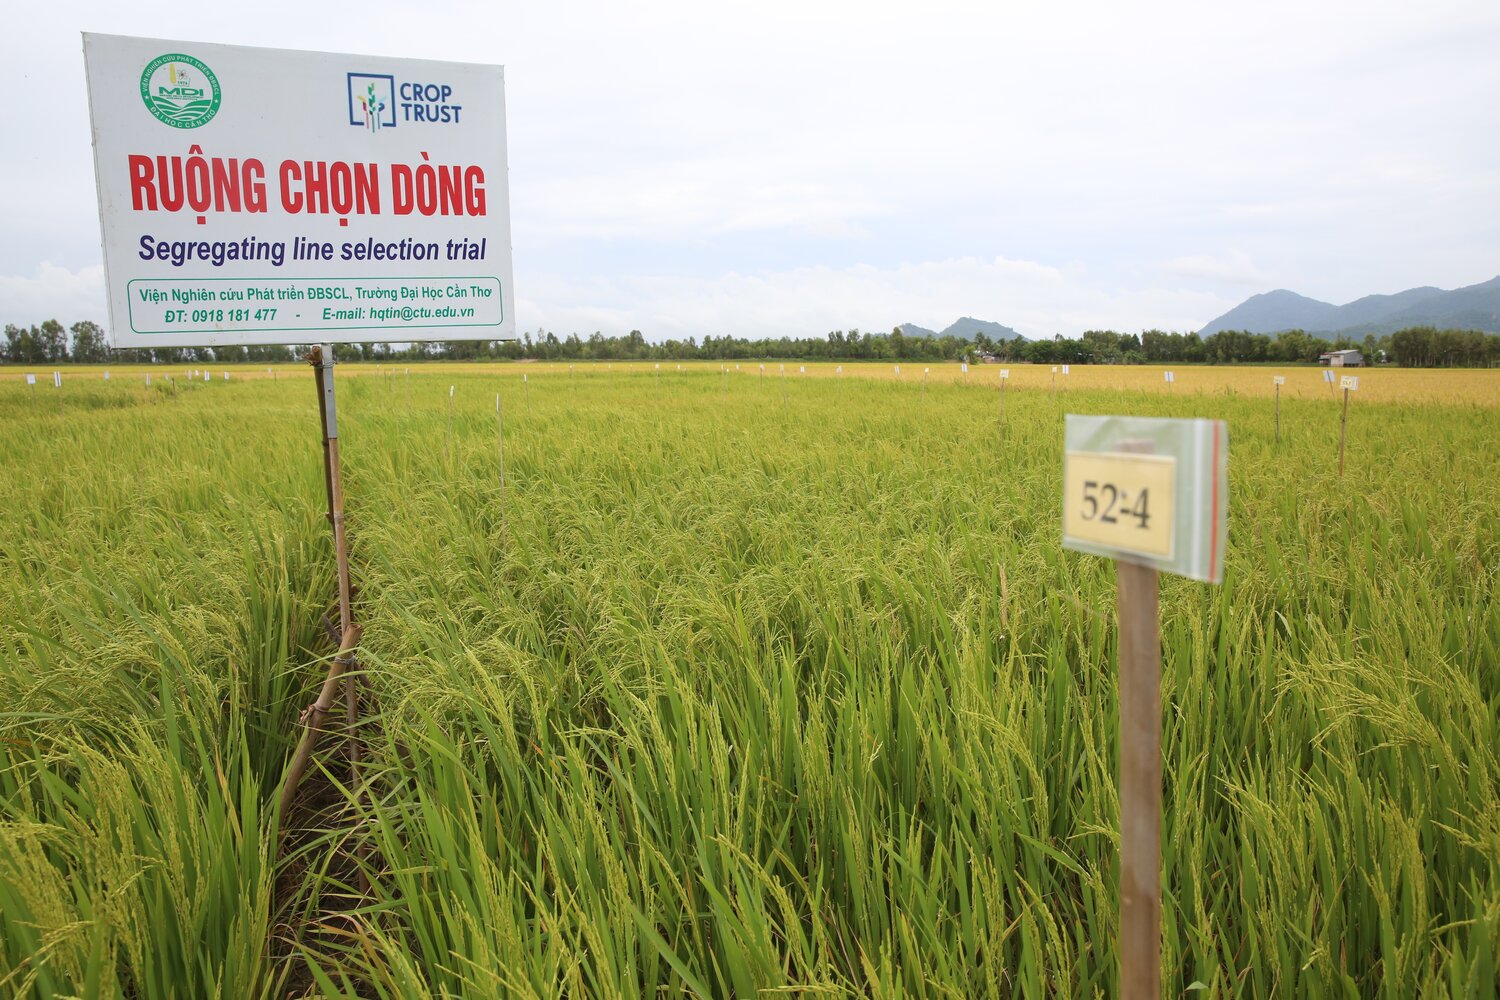 The “Participatory Evaluation of CWR introgressed genetic resources in rice in the Mekong Delta, Vietnam” is one of 19 pre-breeding efforts (100+ partners in 45 countries) which form part of the Crop Wild Relatives Project “Adapting Agriculture to Climate Change: Collecting, Protecting and Preparing Crop Wild Relatives,” funded by the Norwegian Government, and coordinated by the Crop Trust with the Millennium Seed Bank, Kew. Photo: L.M. Salazar 